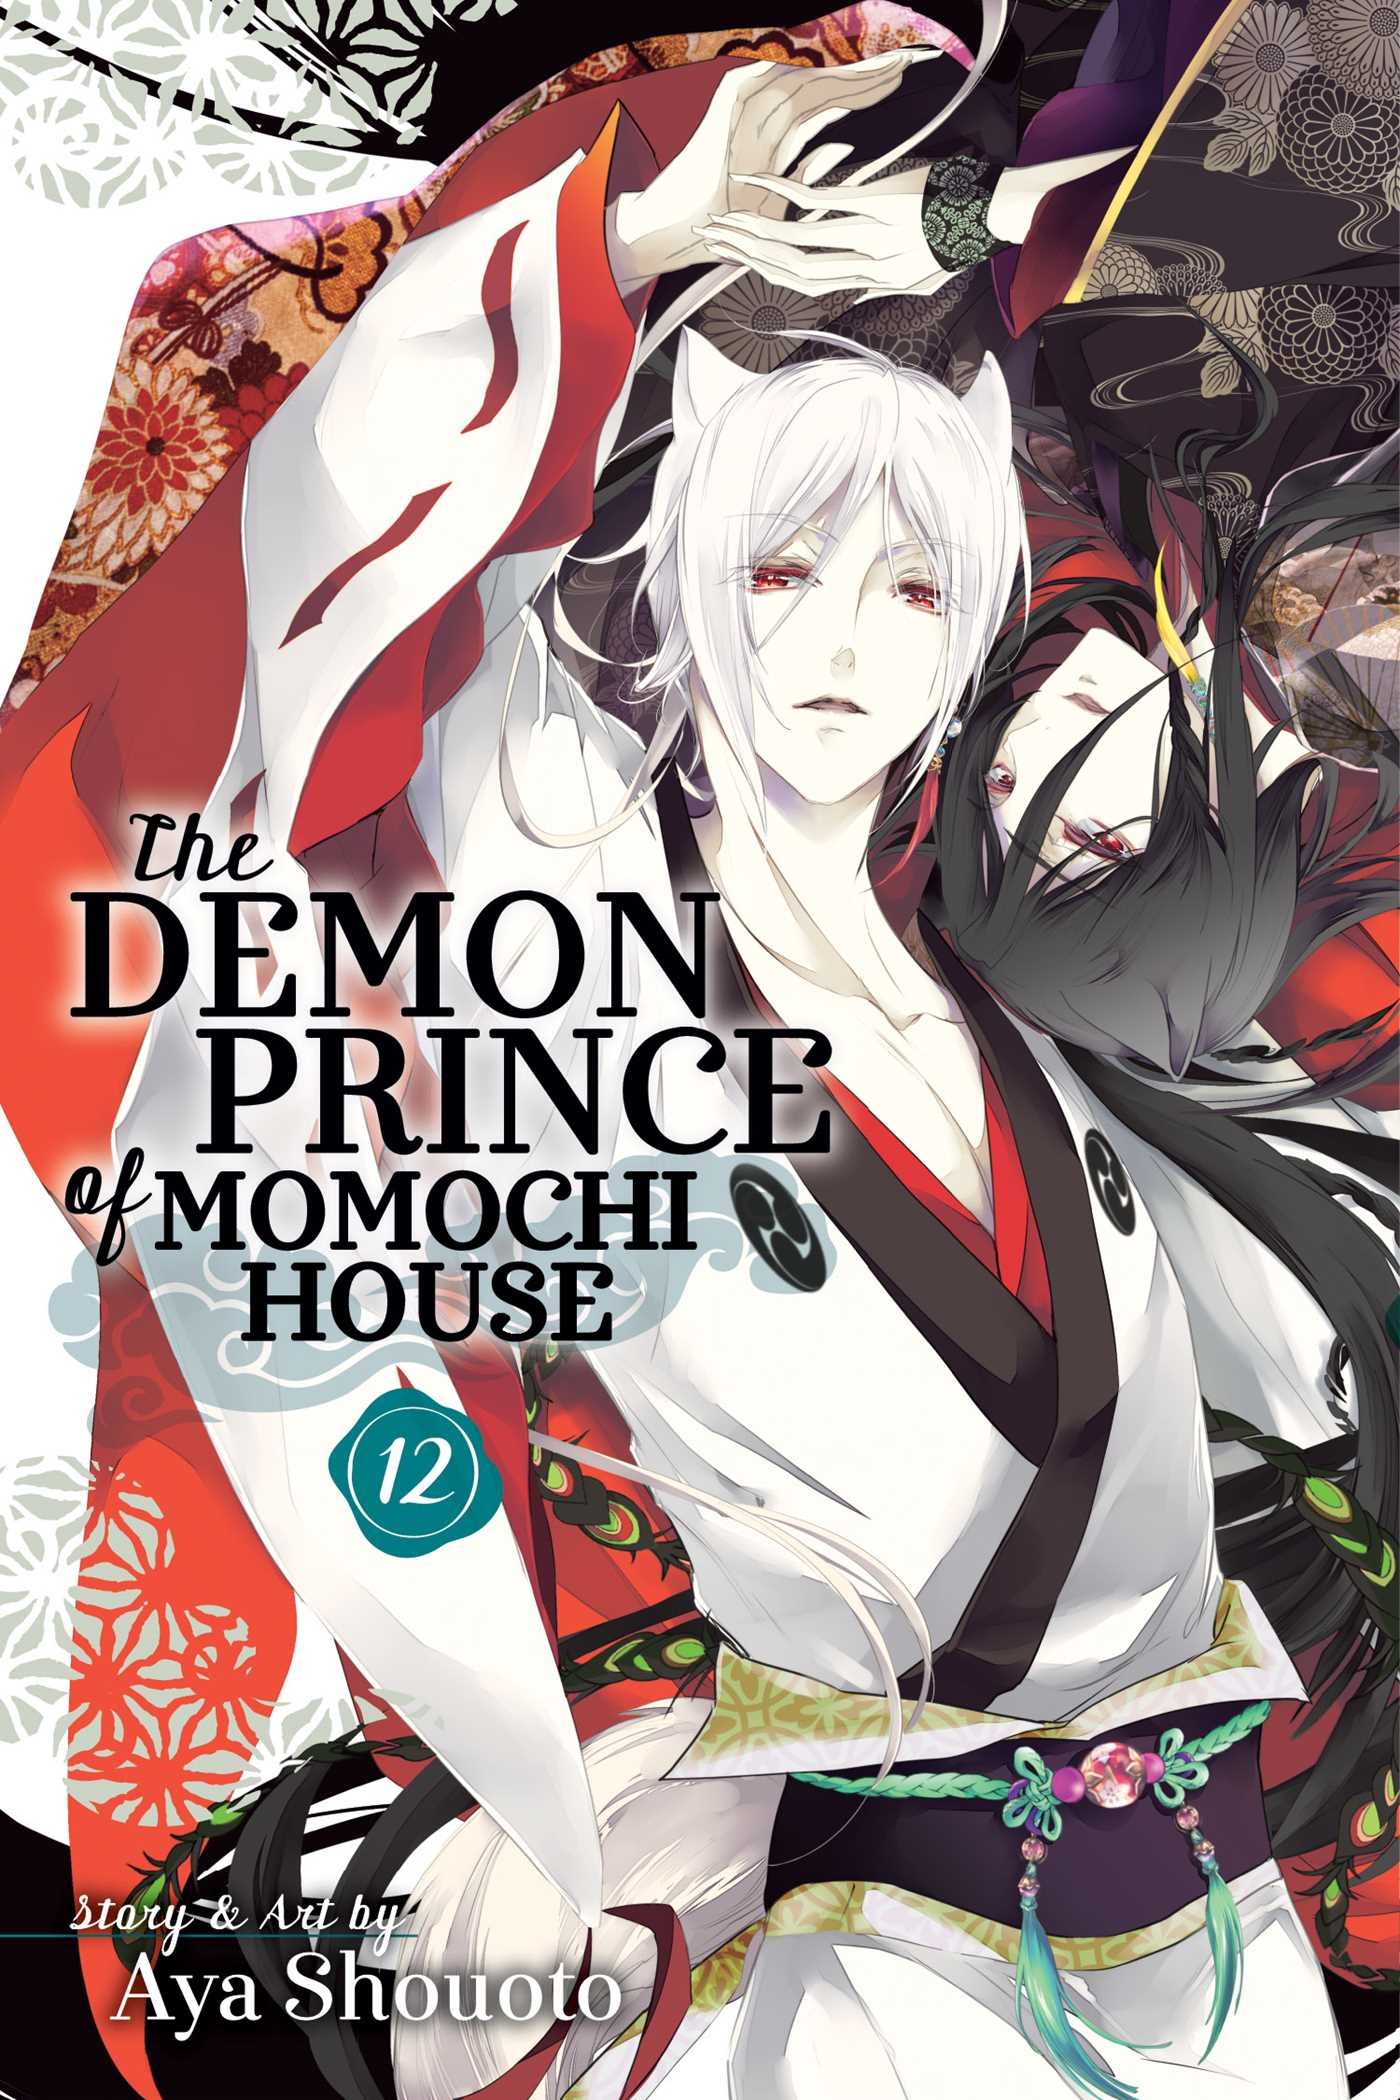 The Demon Prince of Momochi House - Volume 12